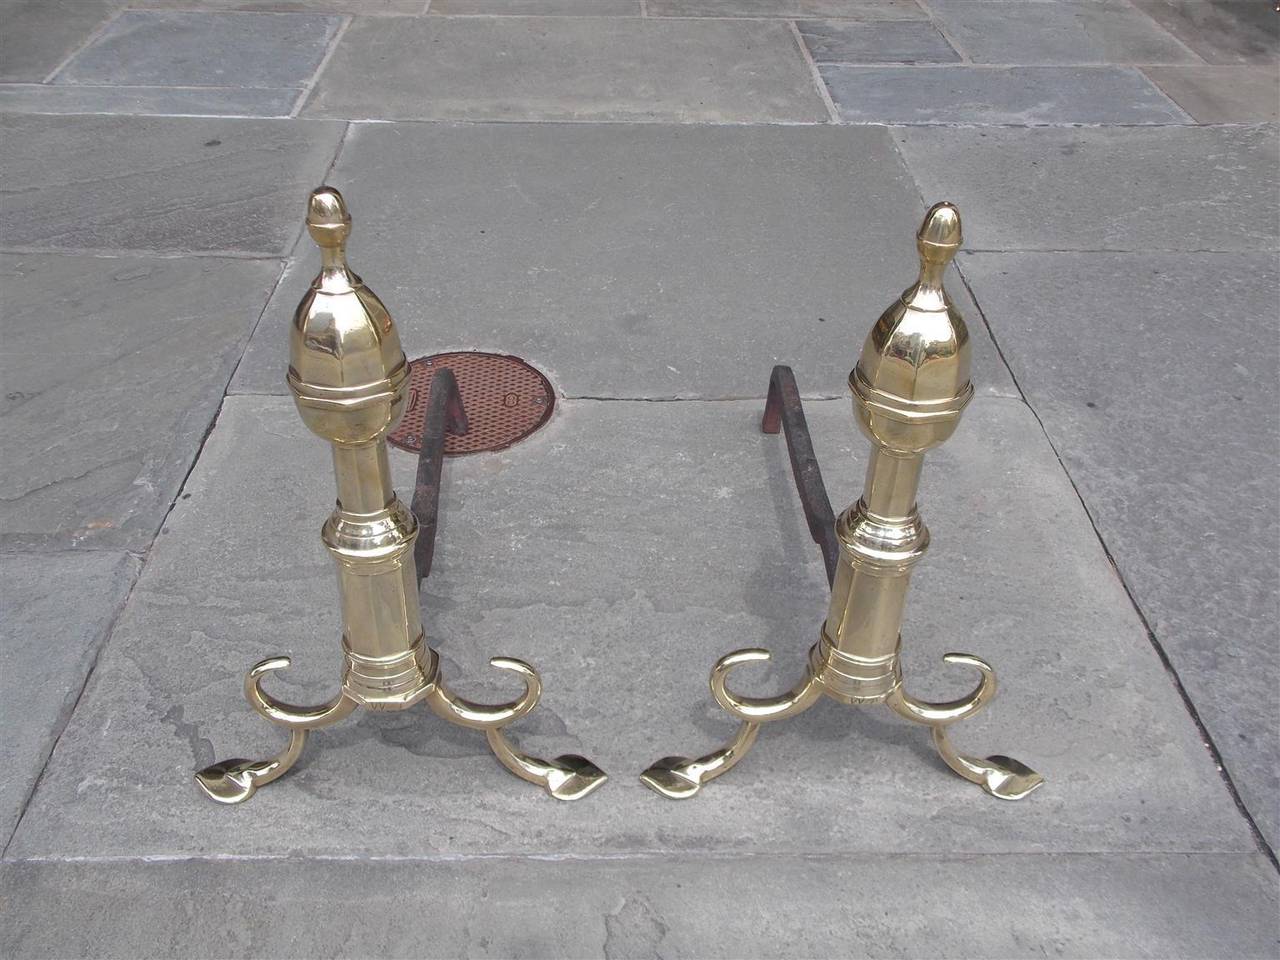 Pair of American brass acorn top finial andirons with turned faceted plinths, looped spur legs, and terminating on step back stylized penny feet, Early 19th Century, Philadelphia.